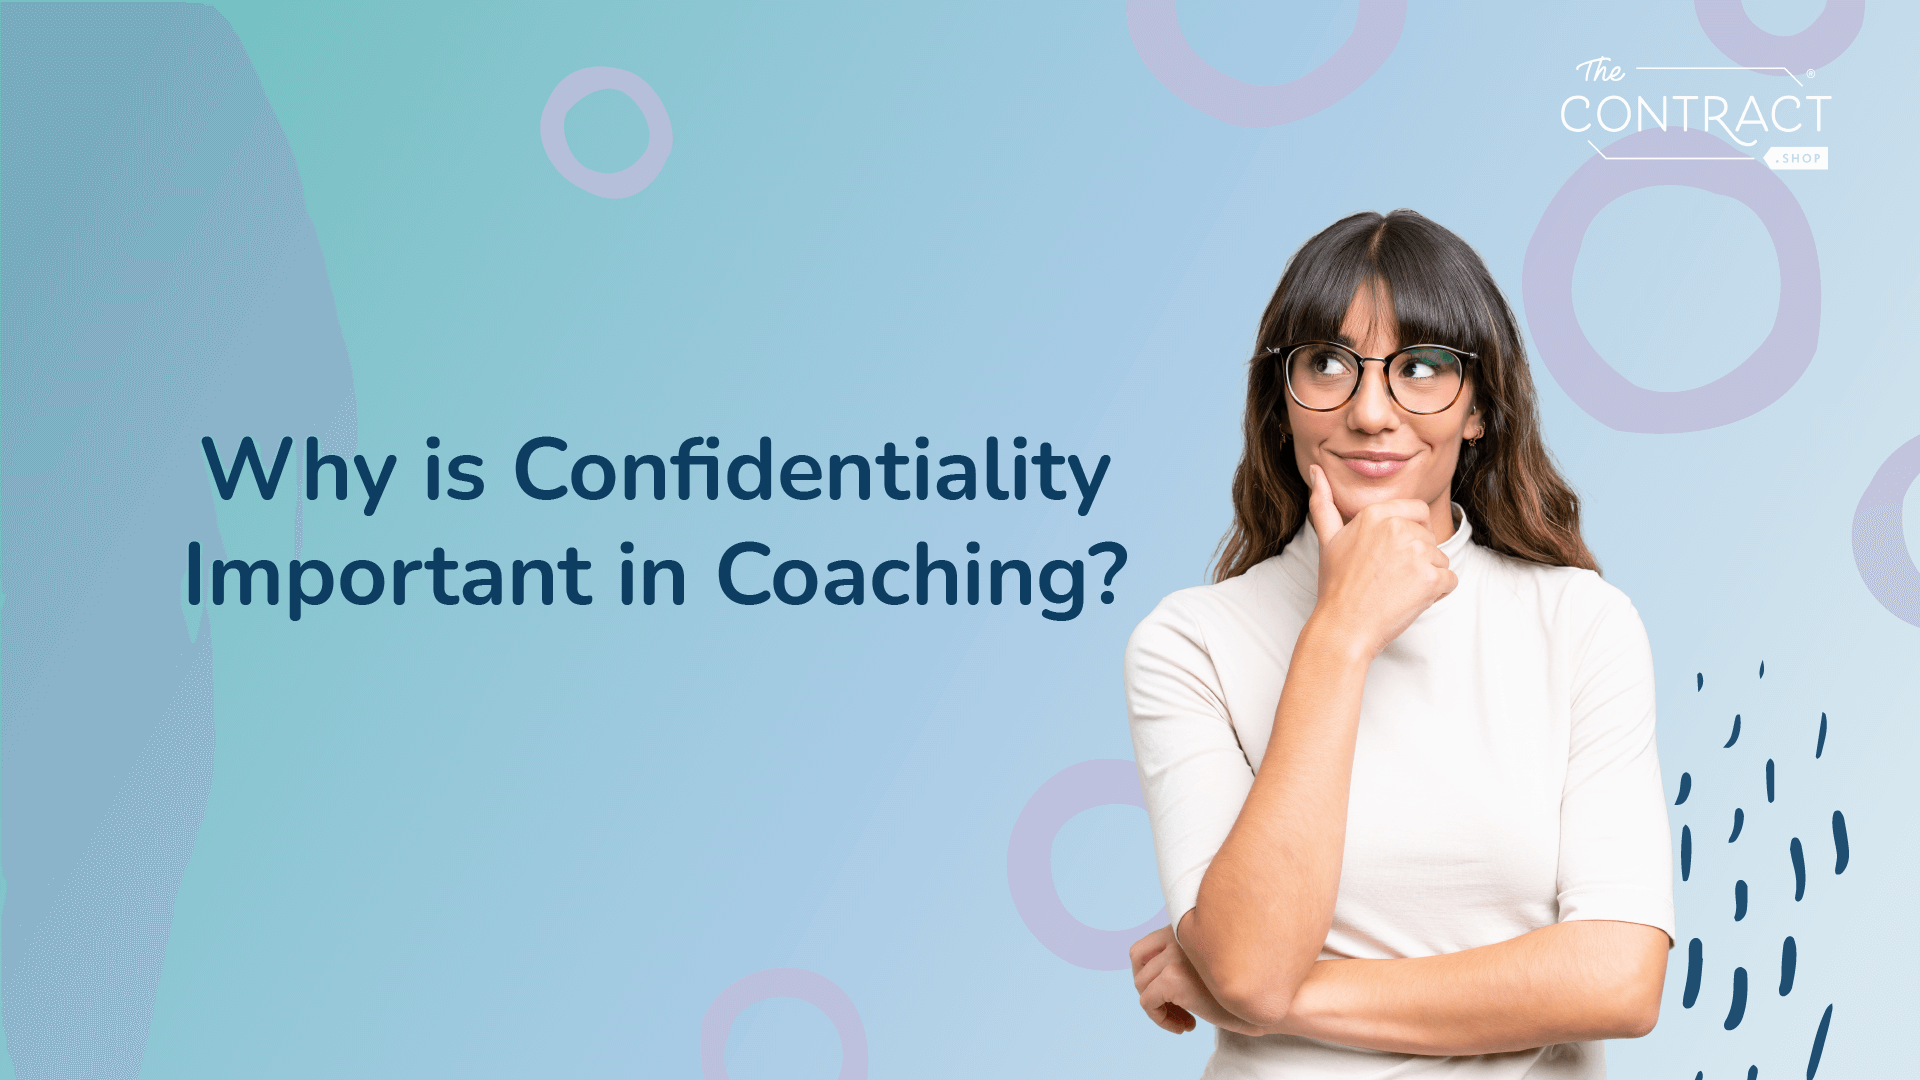 Why is Confidentiality Important in Coaching?